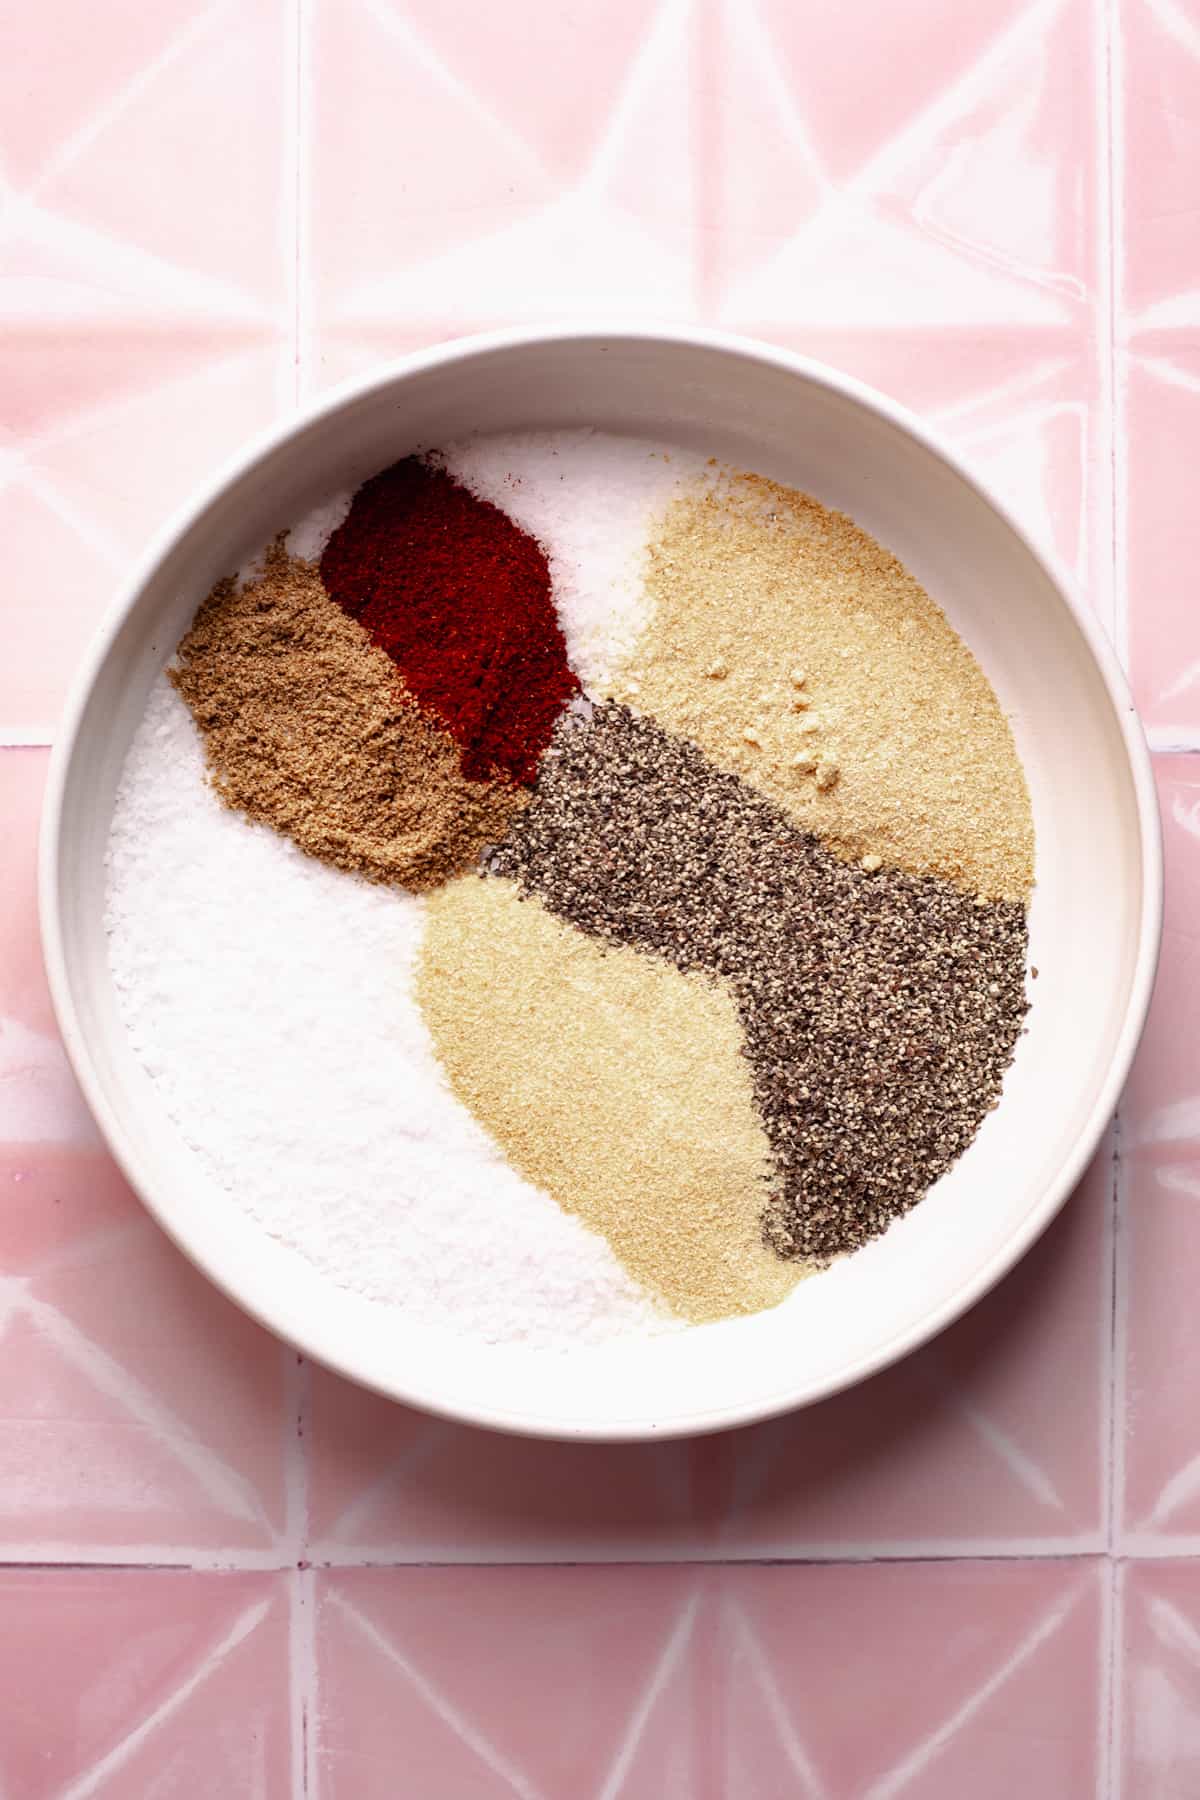 Spices in a white bowl on pink tile.